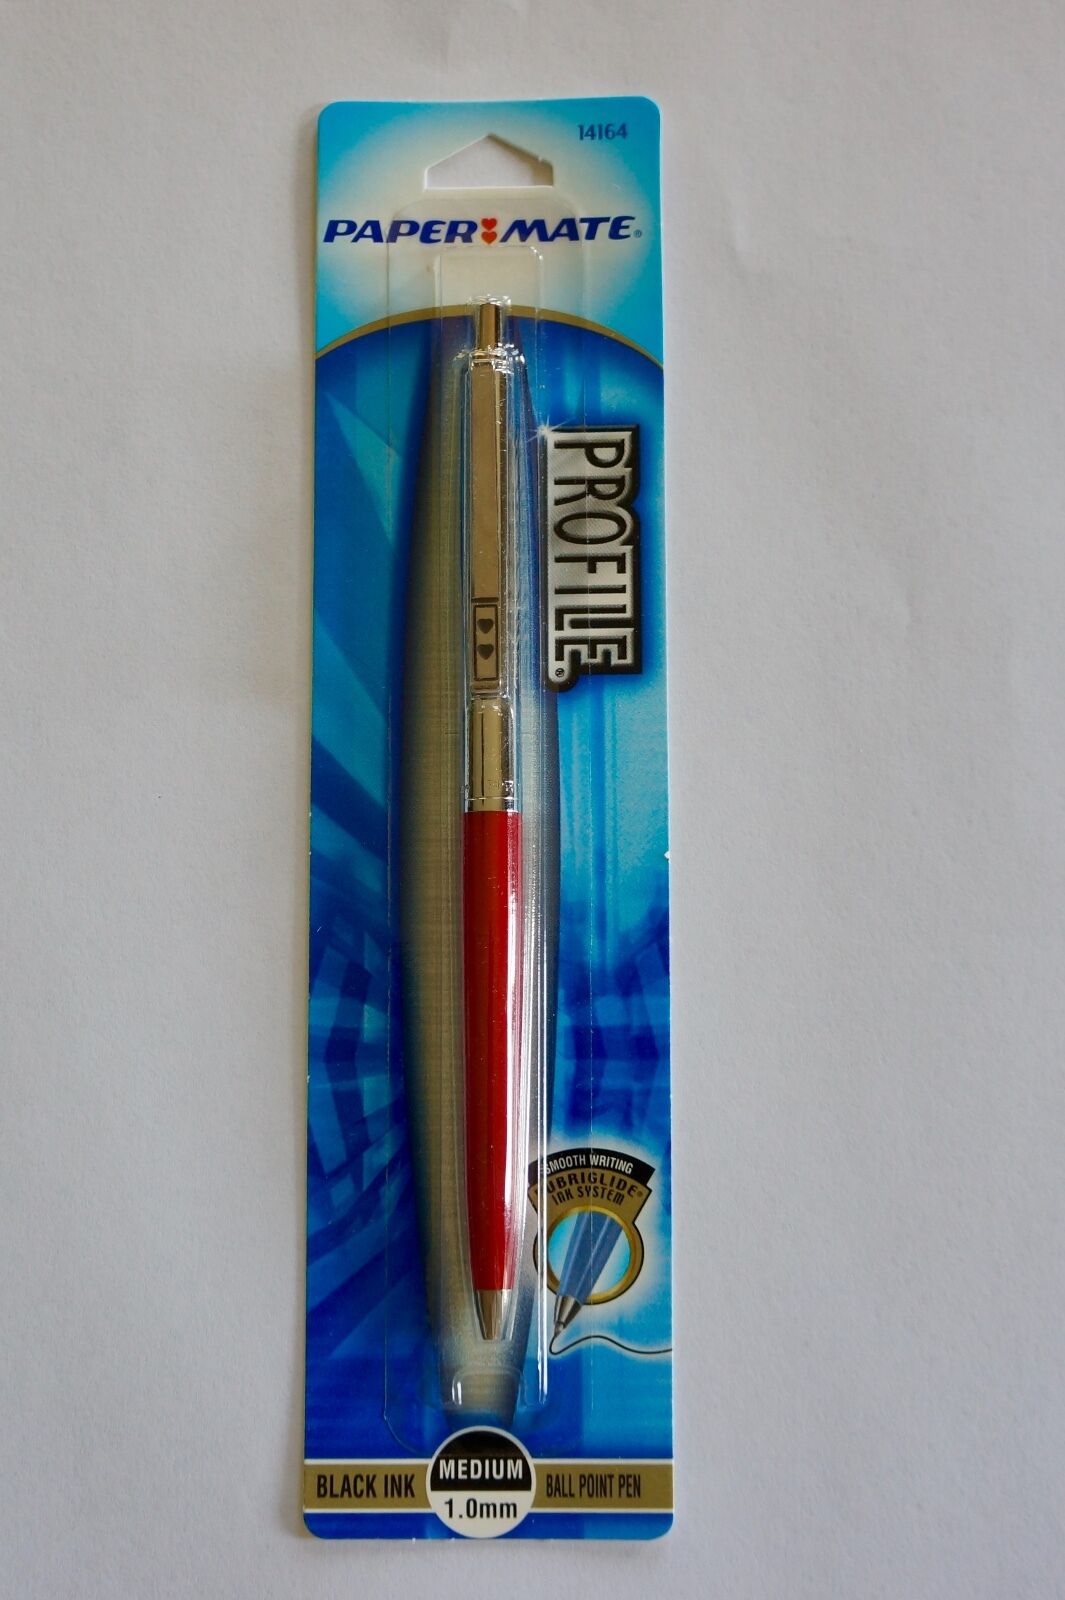 Papermate 14164 Profile Slim Pen Red*new In Package*black Ink- Medium Ball Point